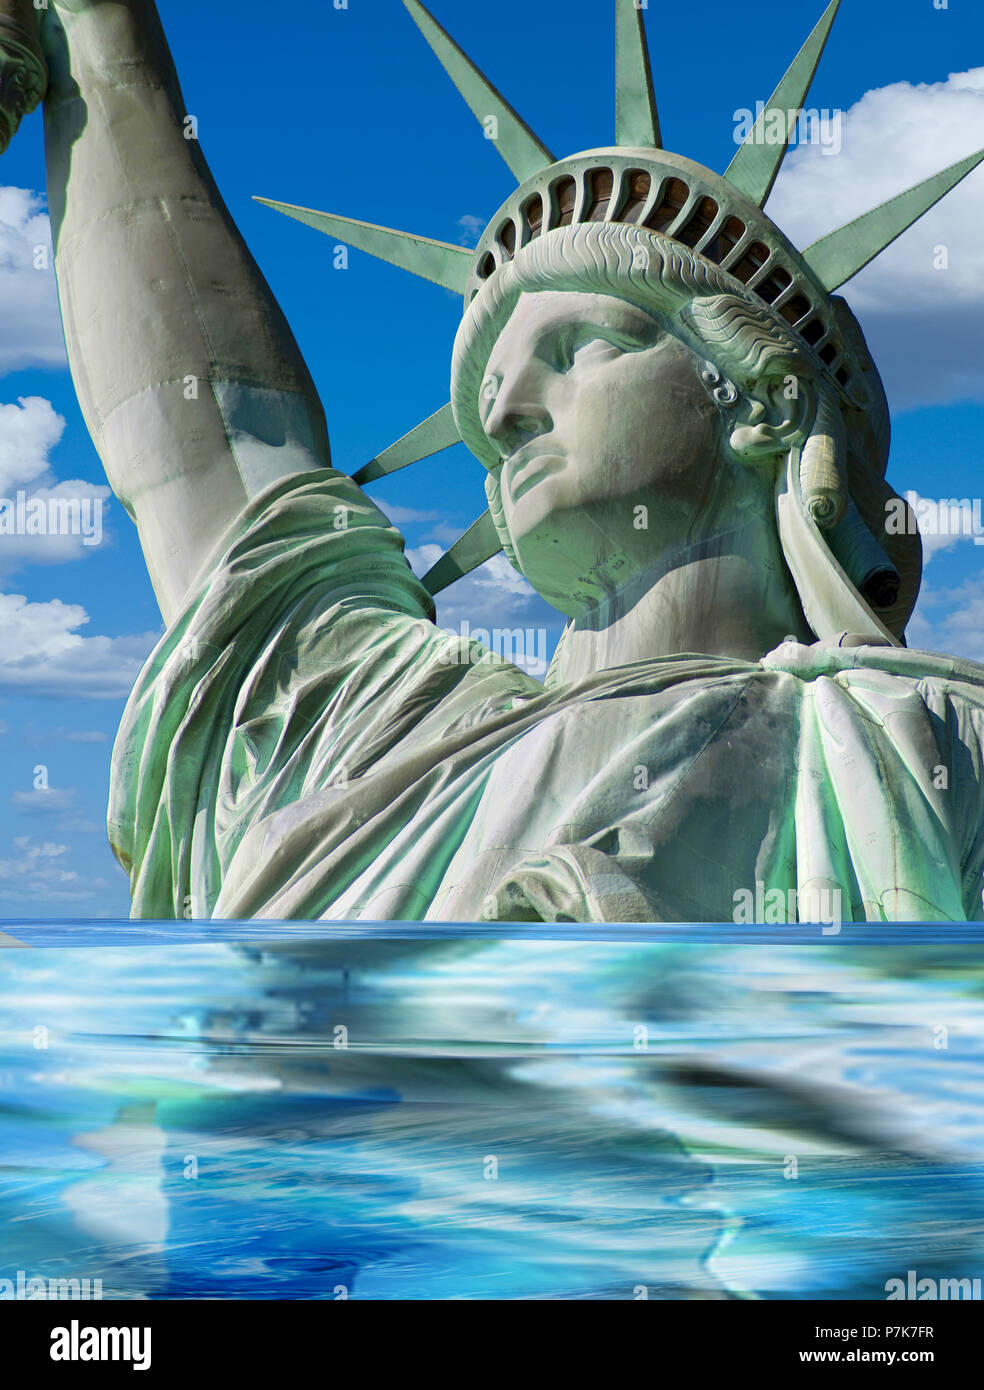 Lady Liberty sinking in a world of change. Stock Photo